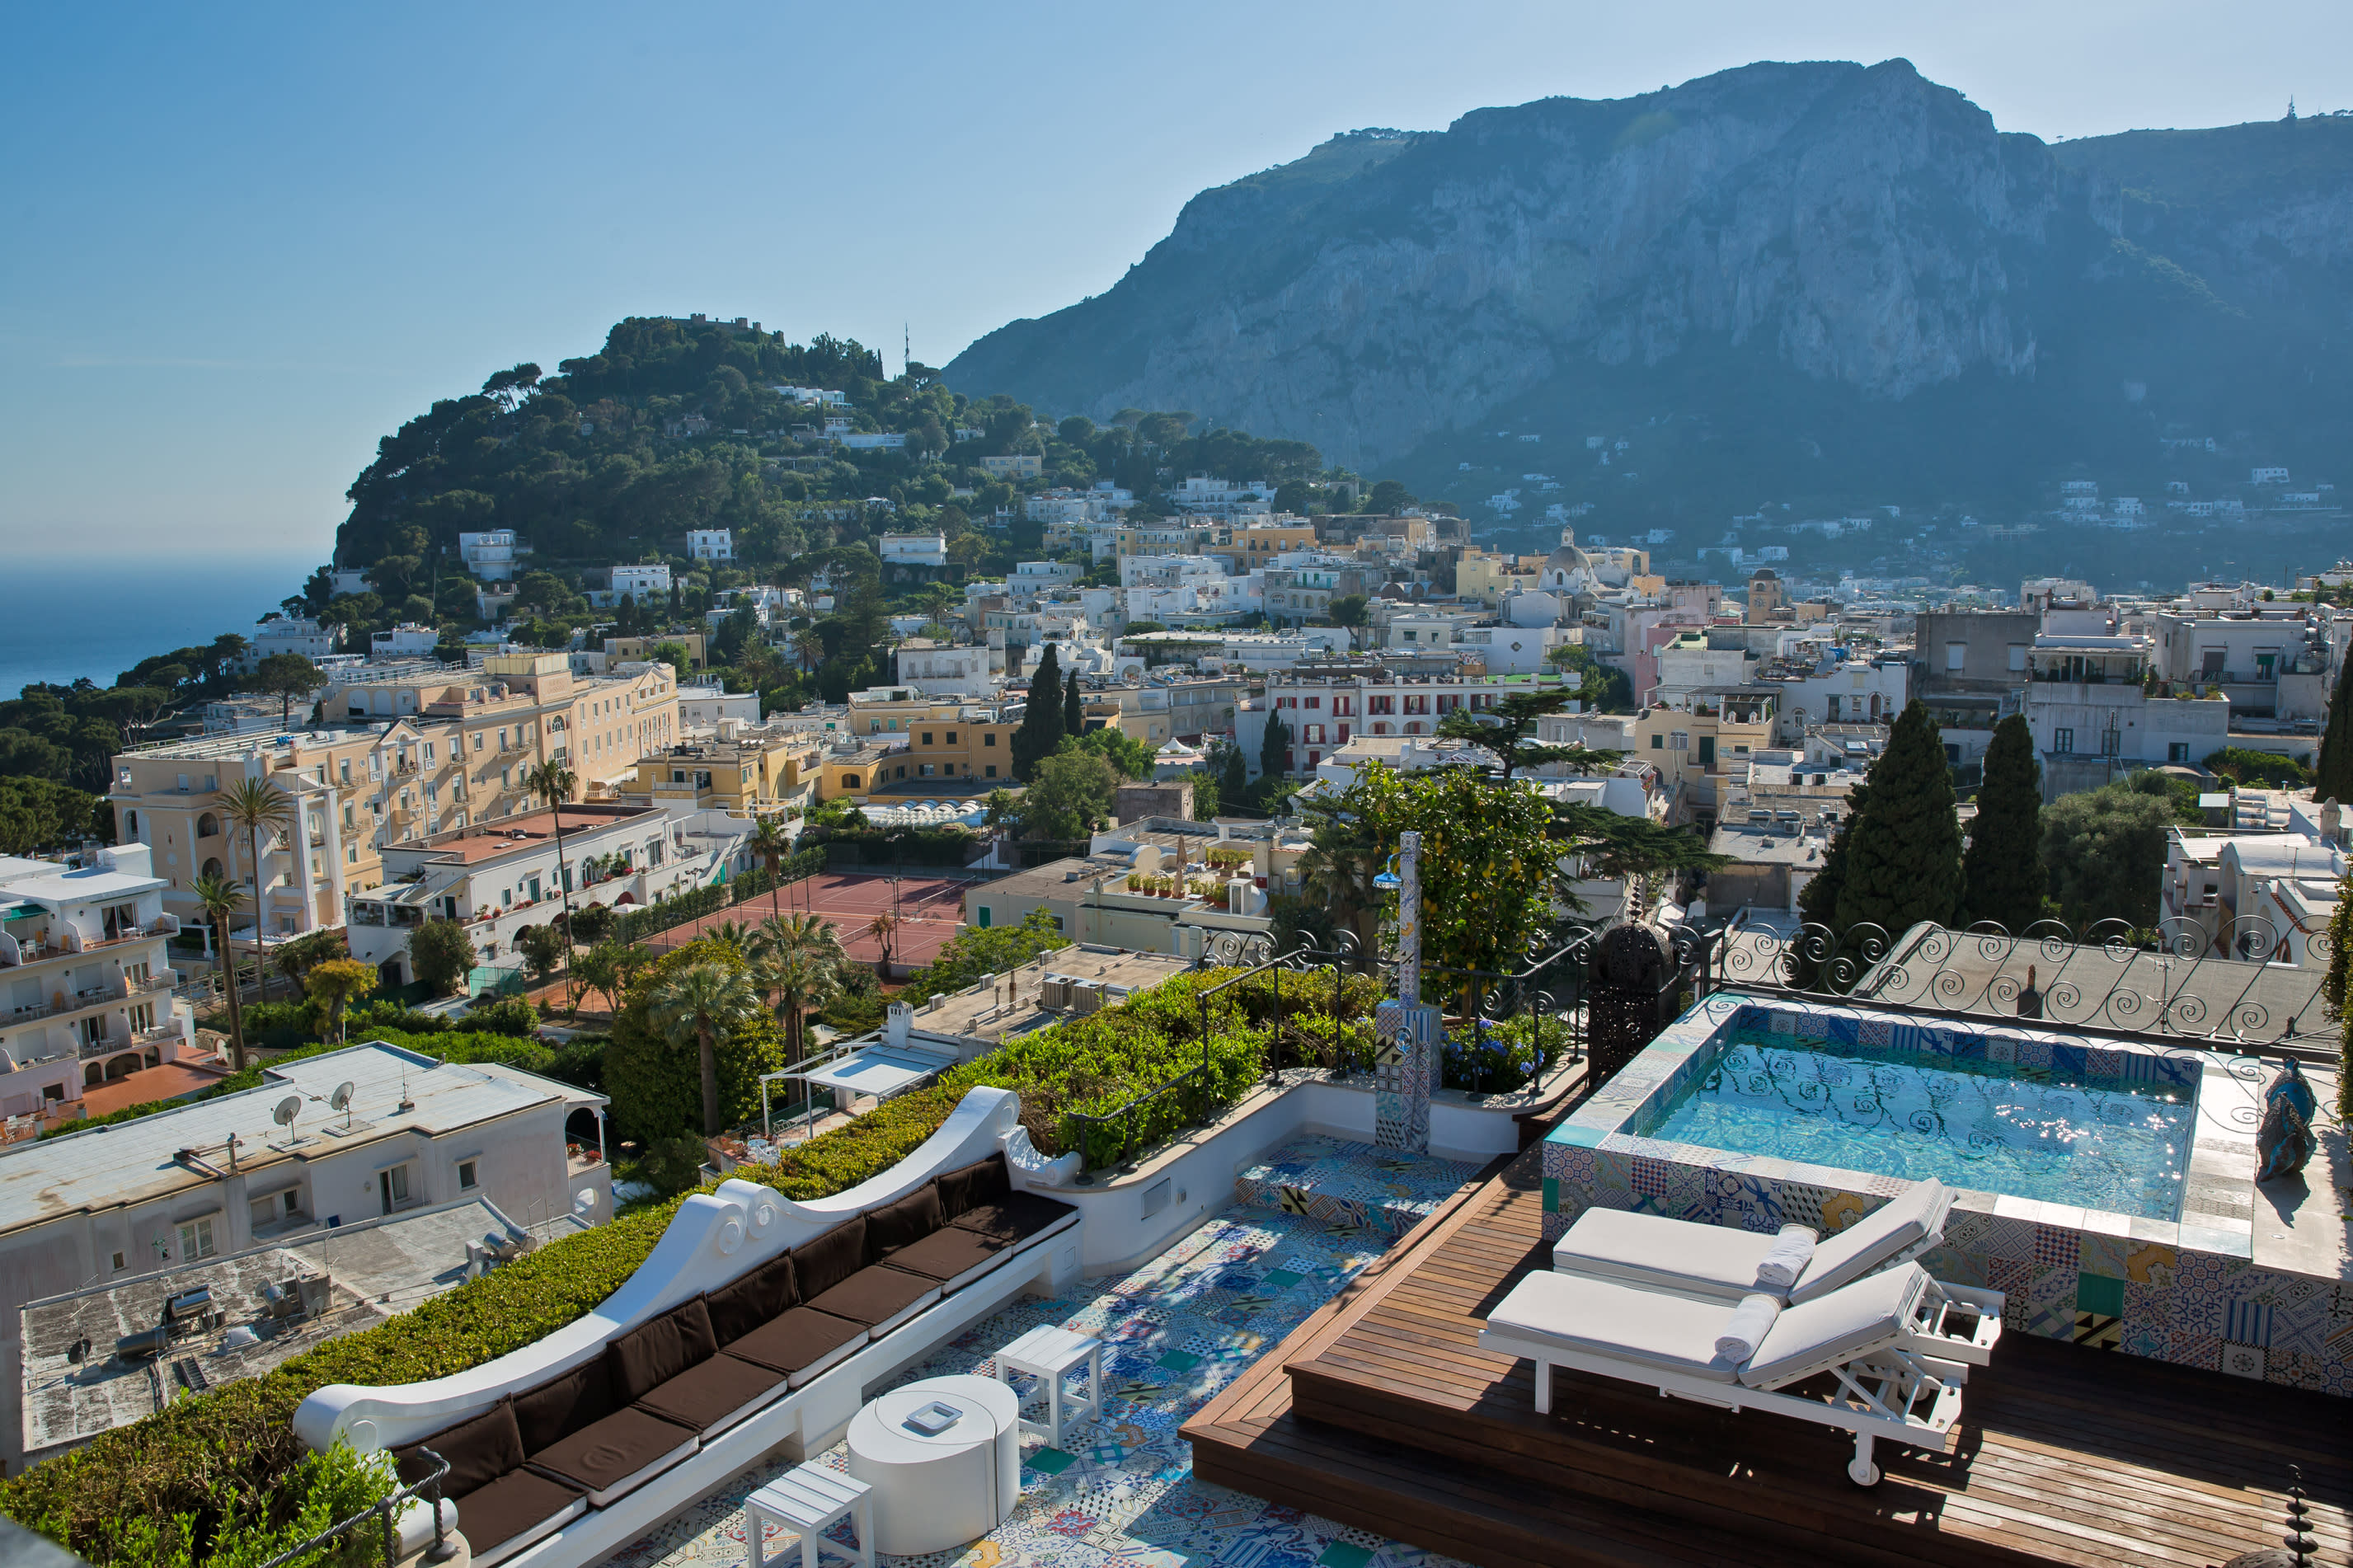 9 Best Hotels in Southern Italy - Capri Tiberio Palace